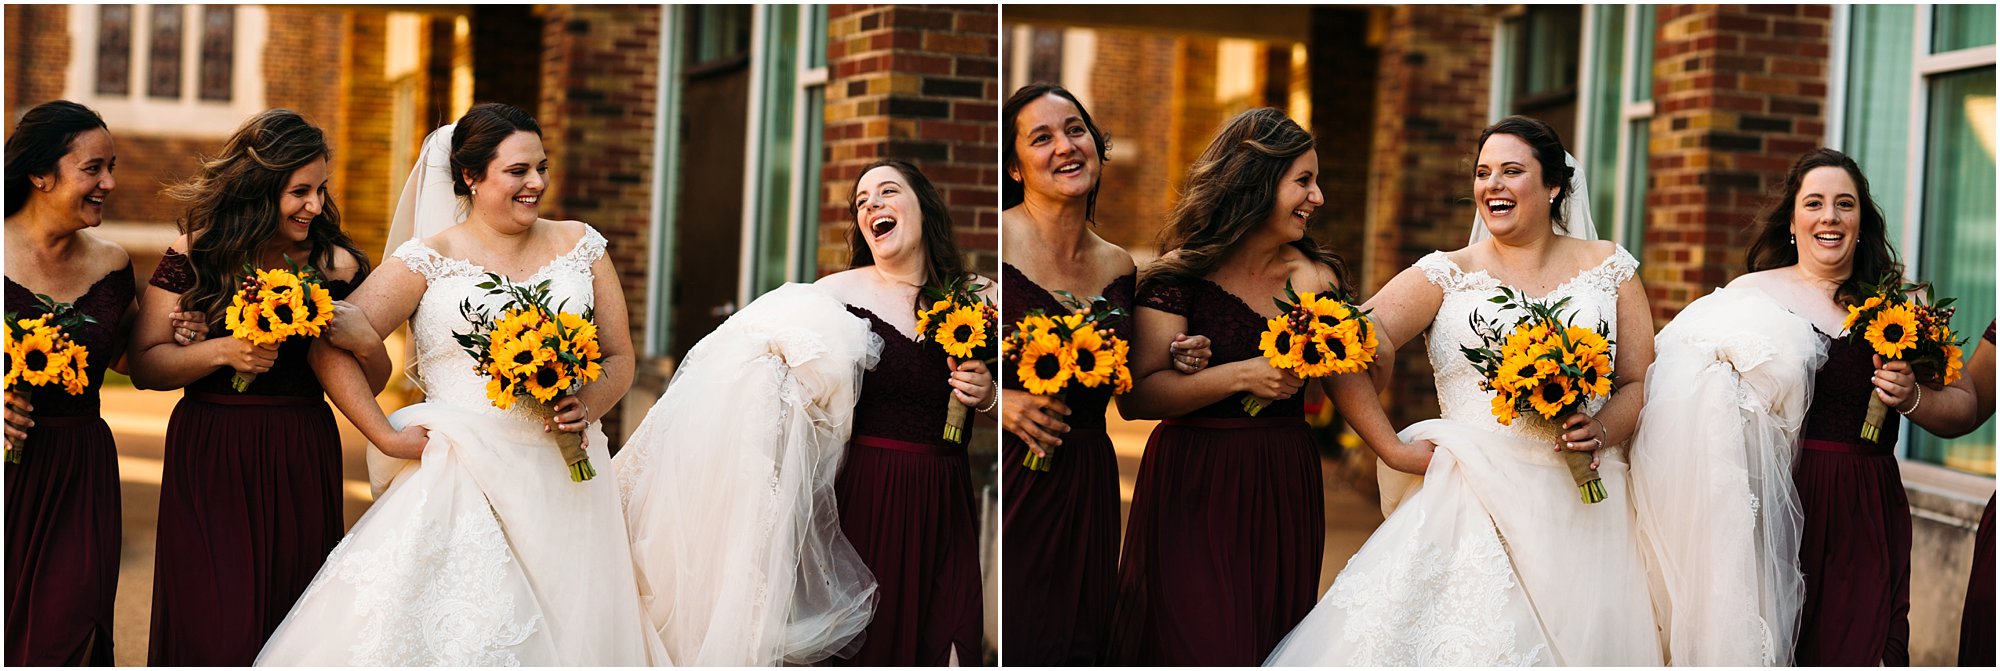 Bride walking and laughing together with bridesmaids in Memphis Tennessee